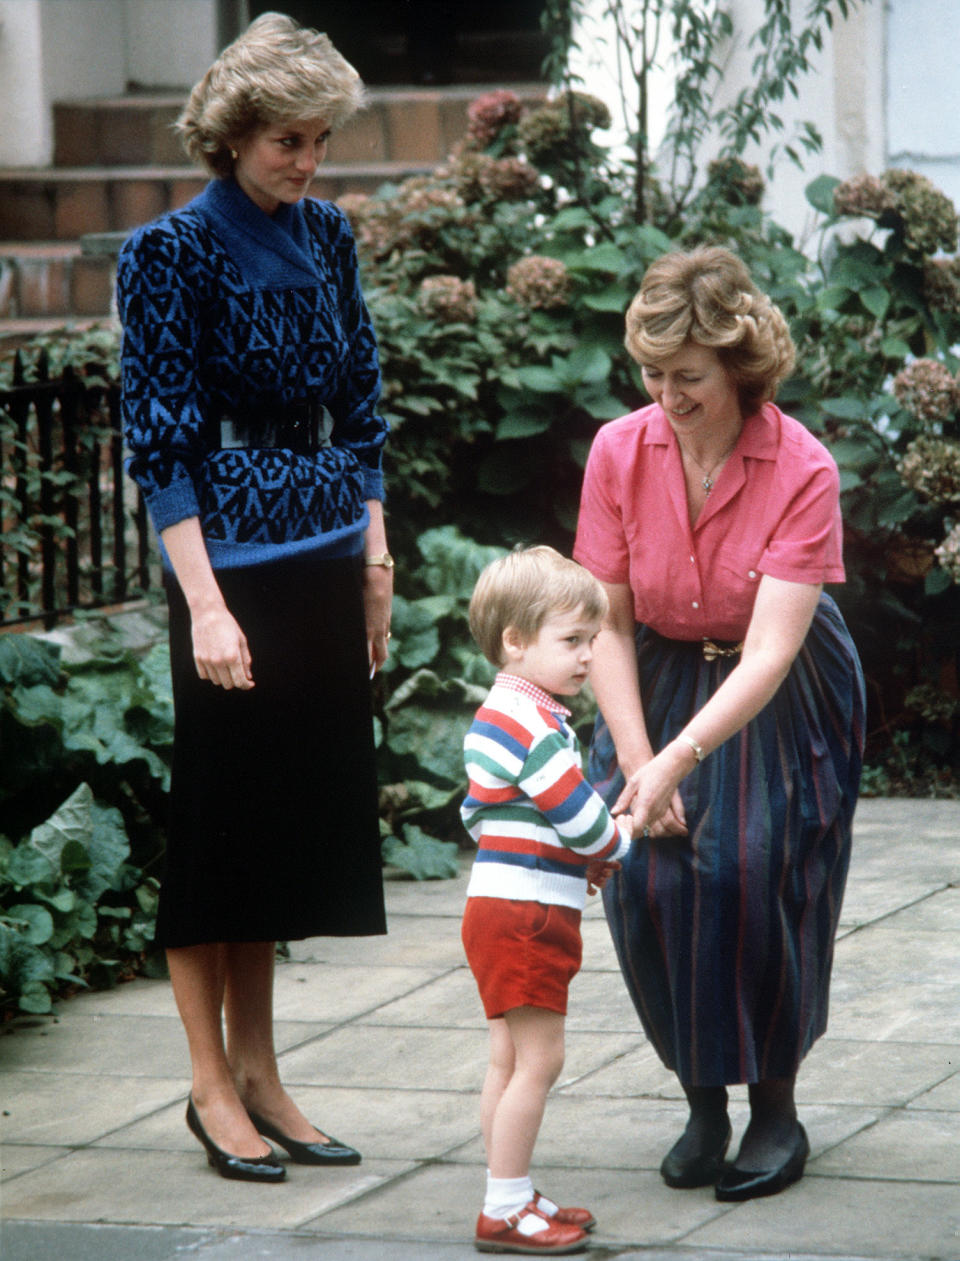 Diana, The Princess of Wales looks on as Mrs. Jane Mynors greets Prince William at the Victorian terrace house on his first day at Jane Mynors nursery school in London   (Photo by PA Images via Getty Images)